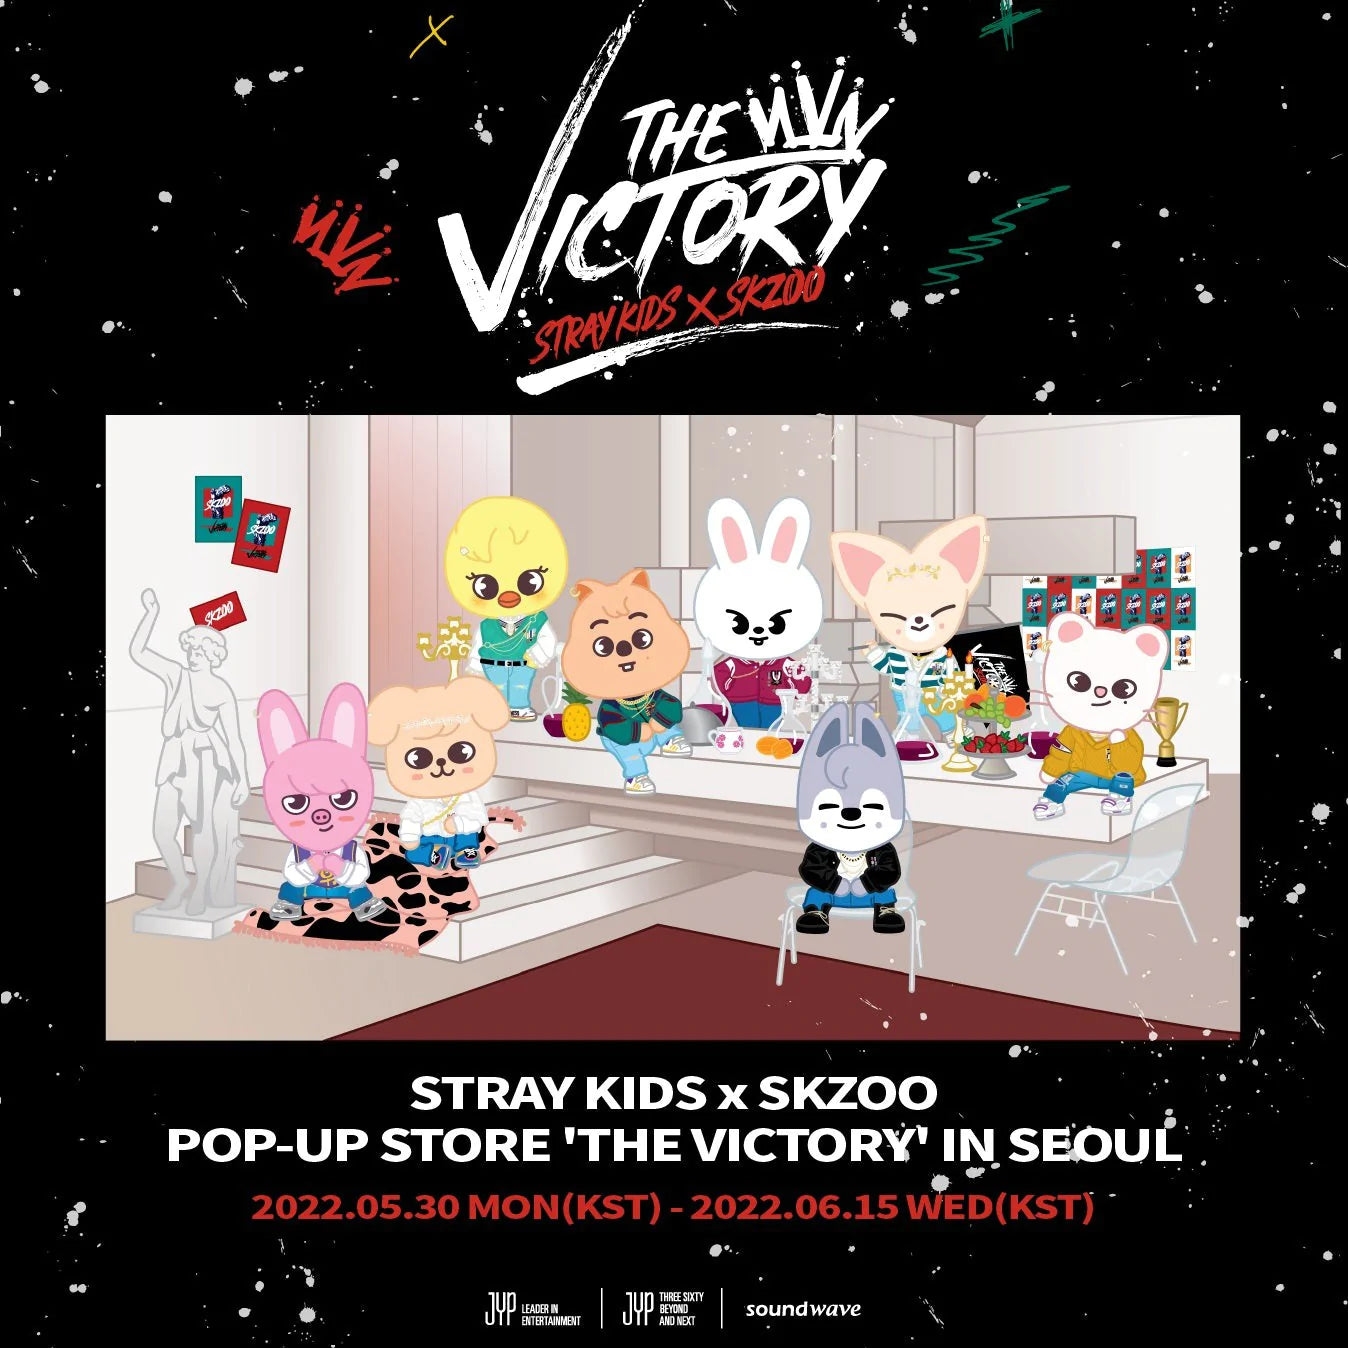 X　SKZOO　MD　POP-UP　Swiss　–　THE　KIDS　OFFICIAL　K-POPup　STRAY　VICTORY